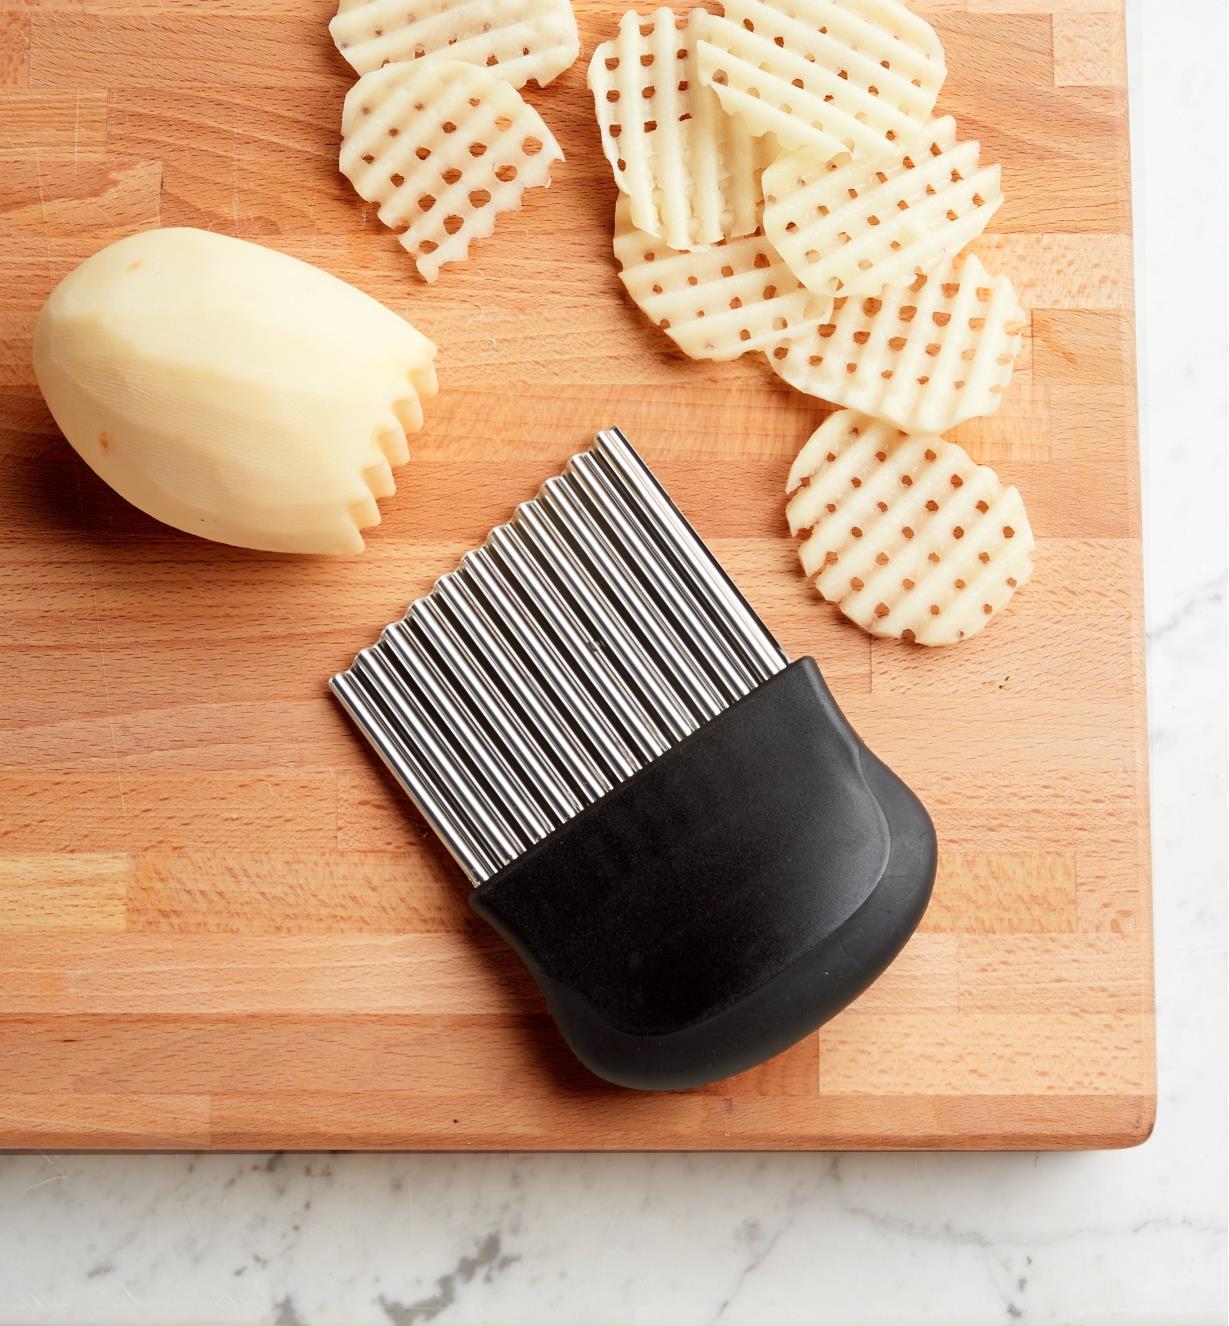 Crinkle Cutter on a cutting board next to potatoes being cut into latticed slices